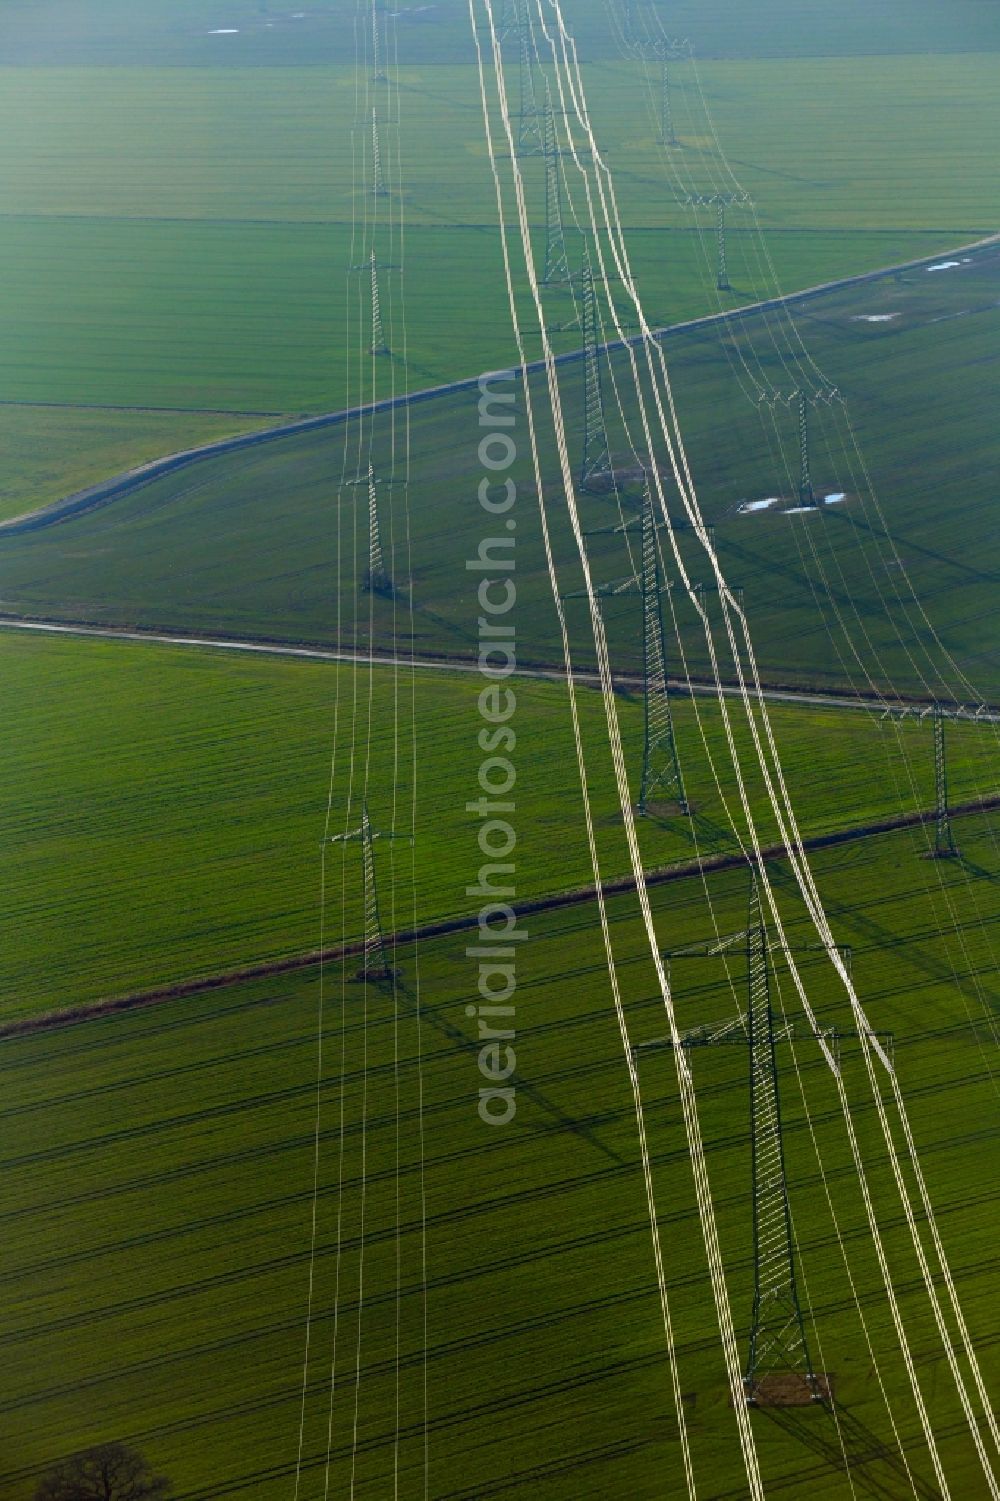 Wansdorf from the bird's eye view: Current route of the power lines and pylons in Wansdorf in the state Brandenburg, Germany